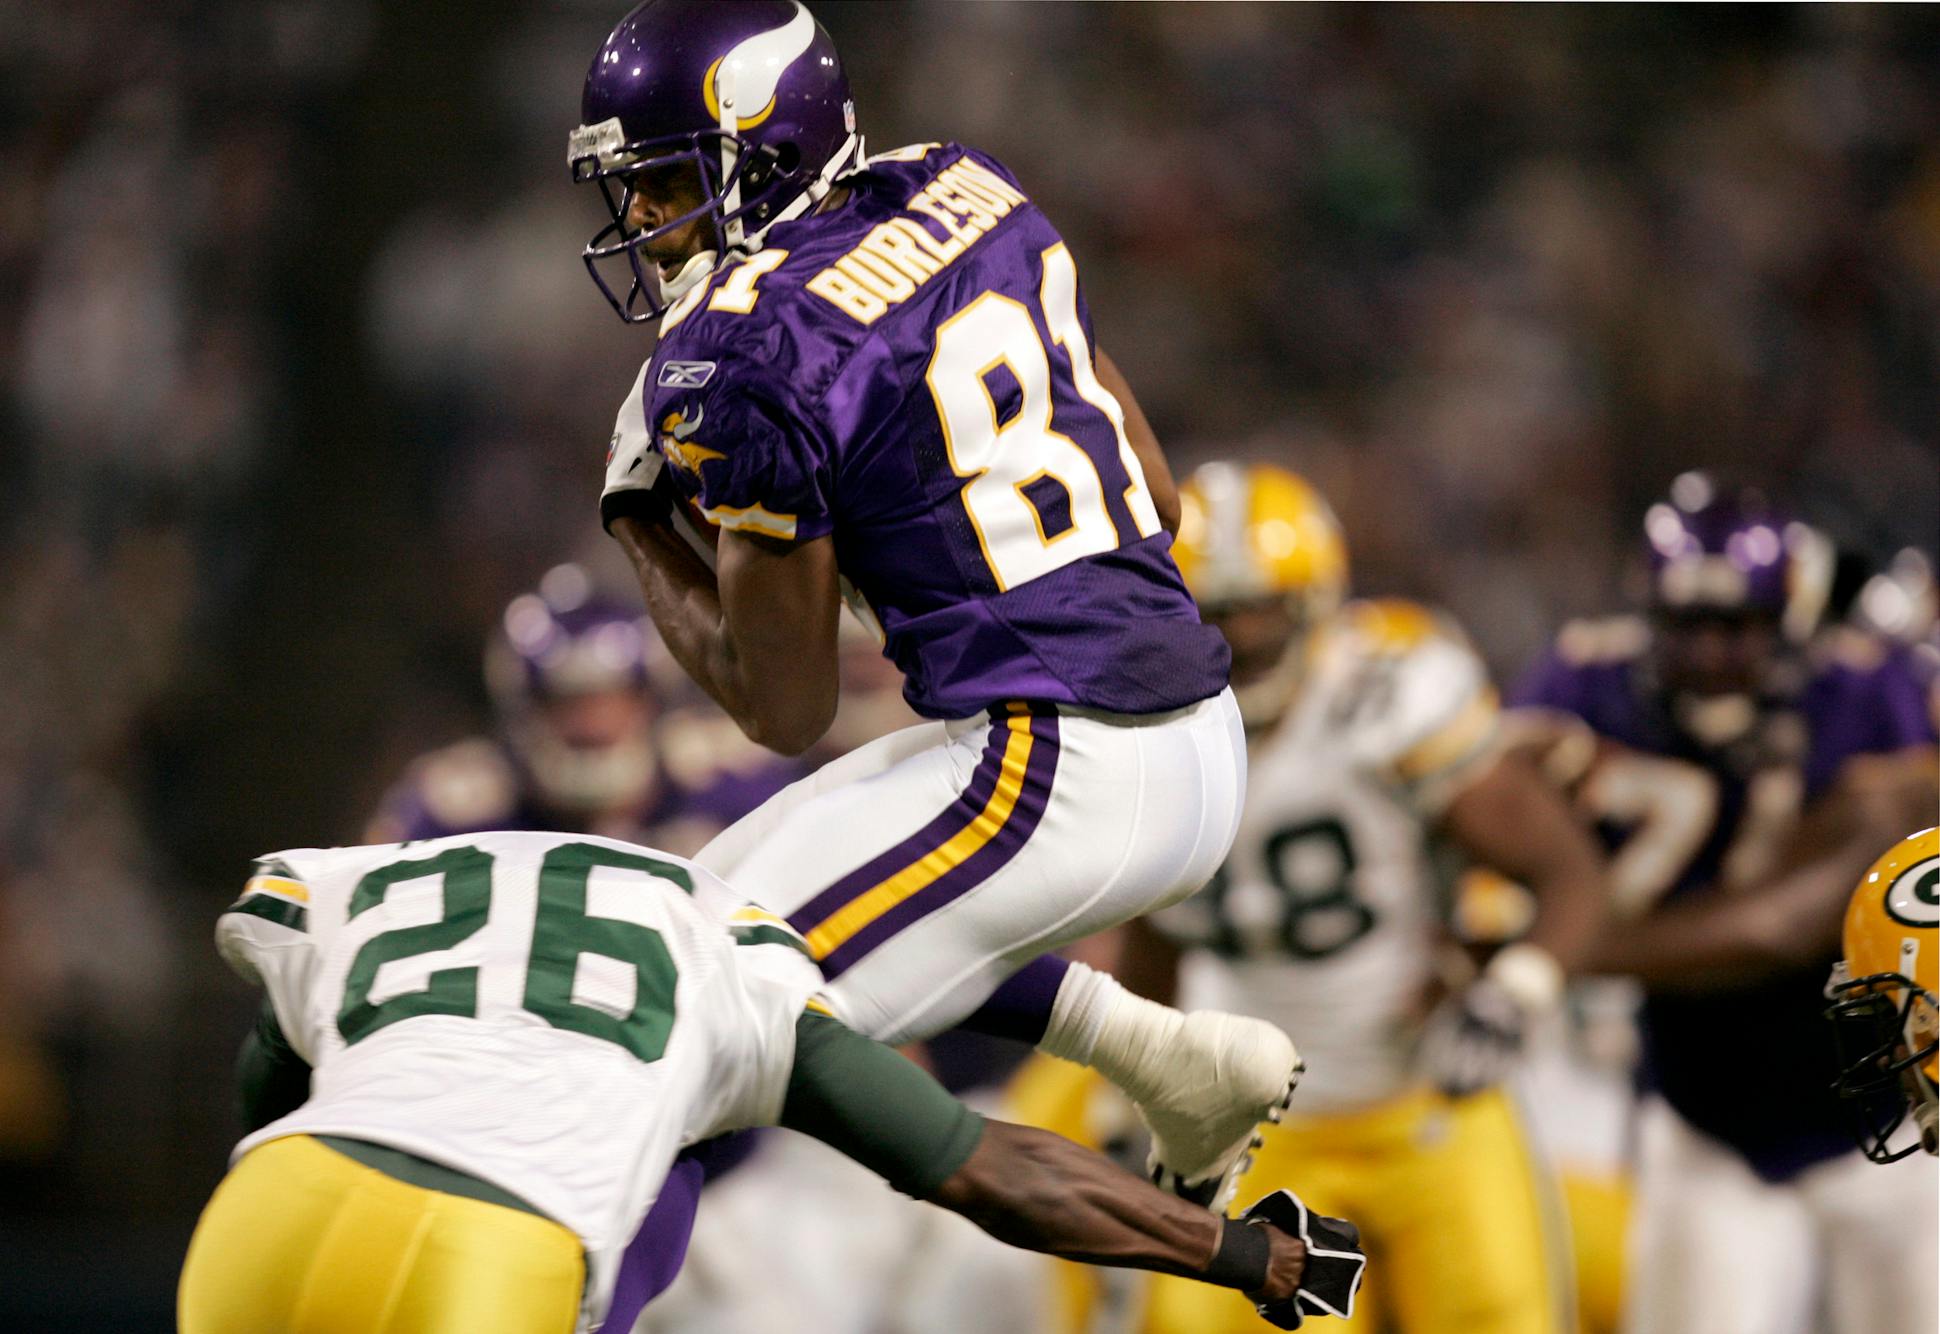 Nate Burleson caught a pass during a 2005 game against the Green Bay Packers at the Metrodome in Minneapolis.